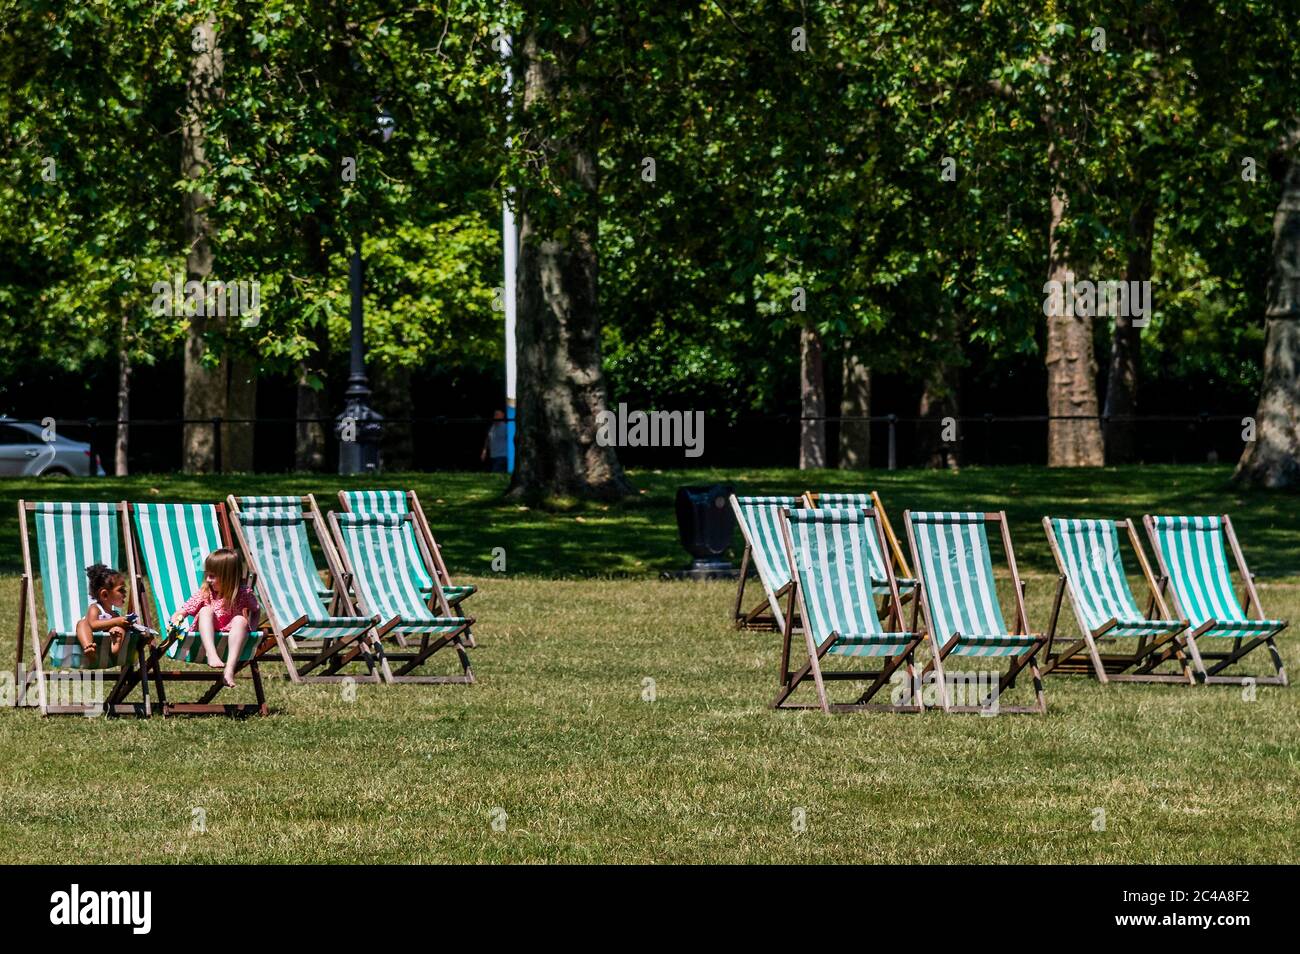 London, UK. 25th June, 2020. The deckchairs are back but hardly anybody is using them - Enjoying the sun in St James Park on possibly the hottest day of the year. The 'lockdown' continues to be eased. Credit: Guy Bell/Alamy Live News Stock Photo